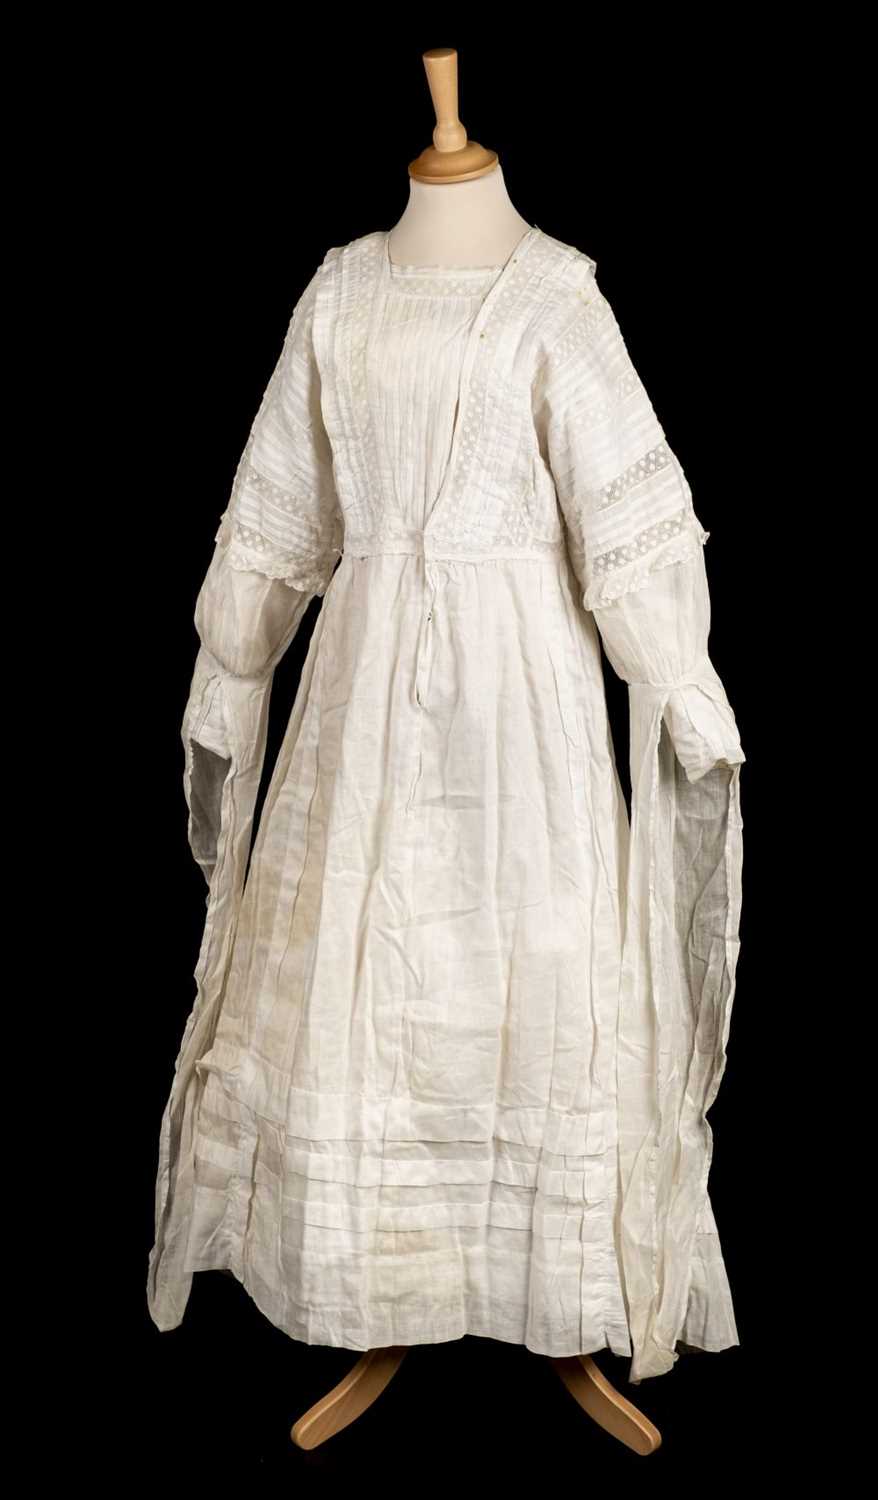 Night gown  Night gown, 18th century chemise, 18th century fashion